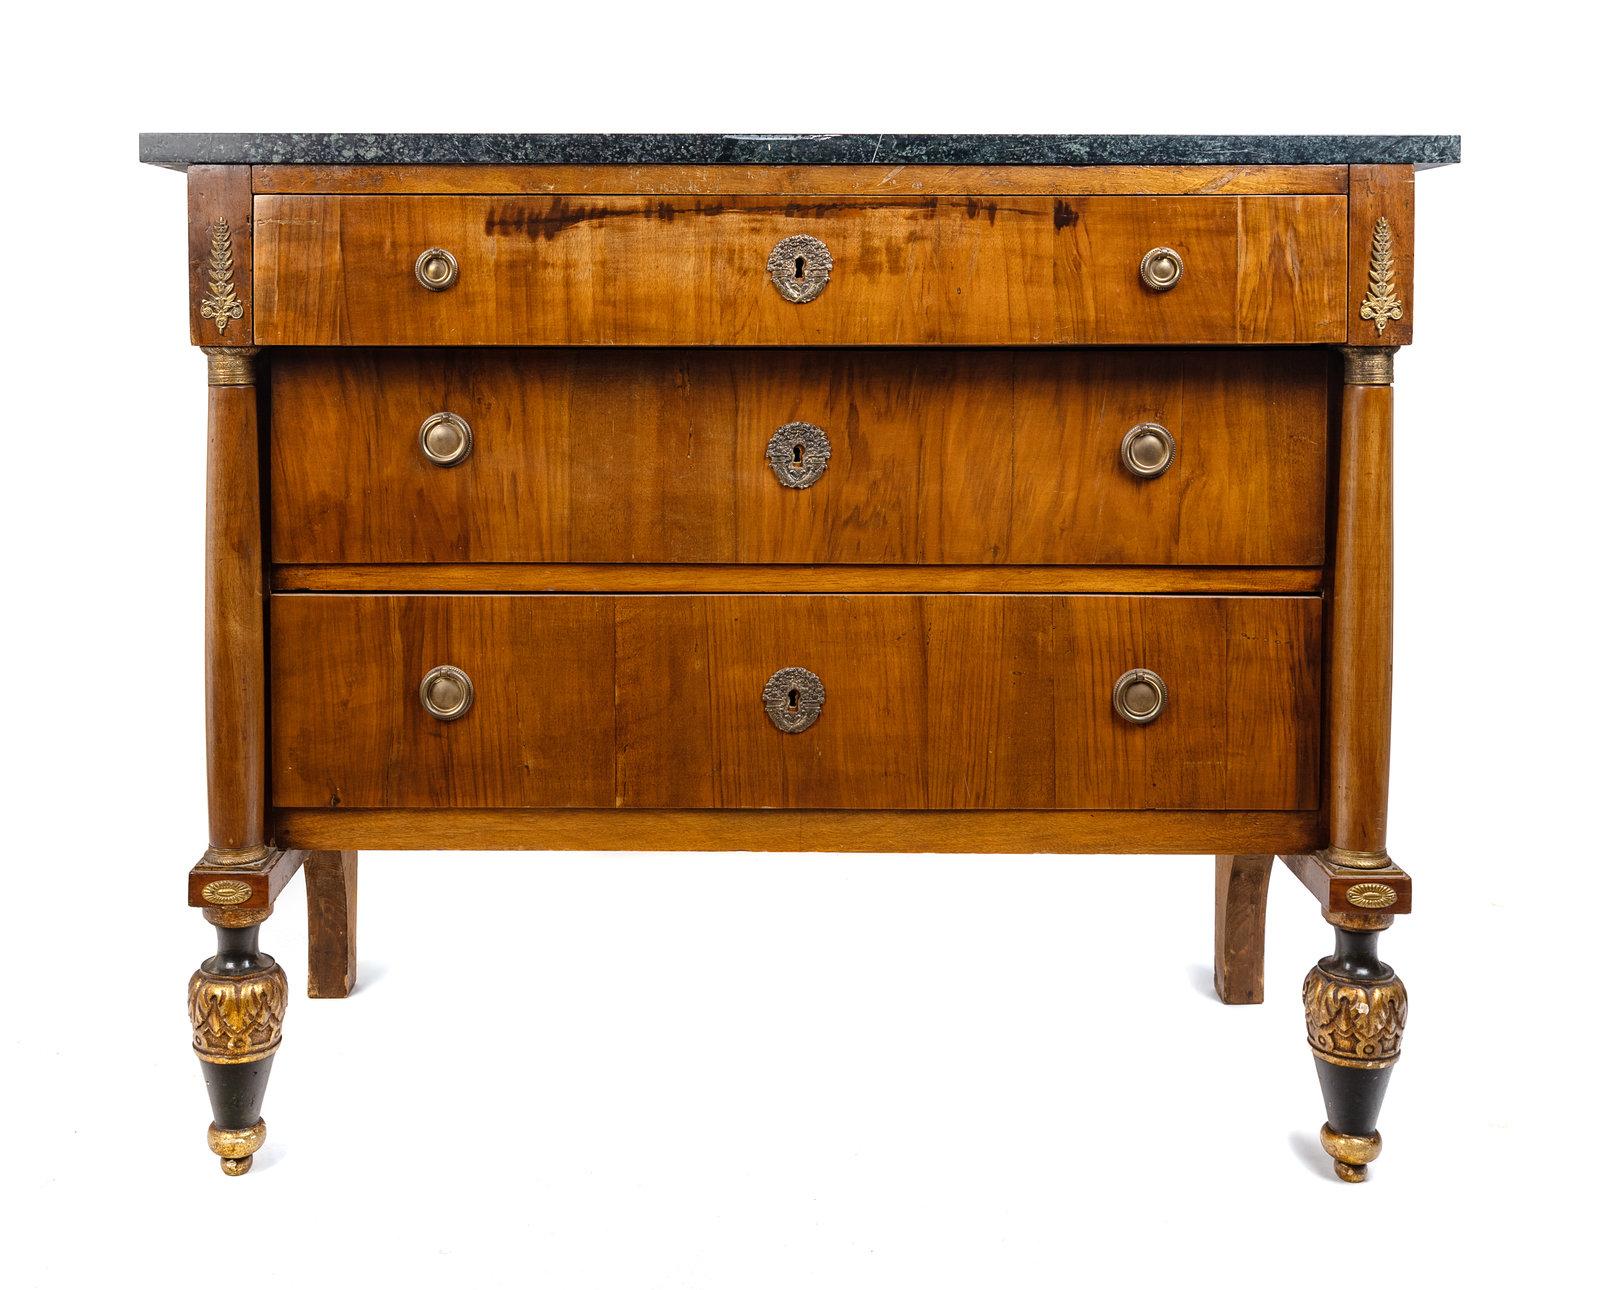 Northern European Mahogany Marble Top Commode with Painted Feet, 19th Century For Sale 4